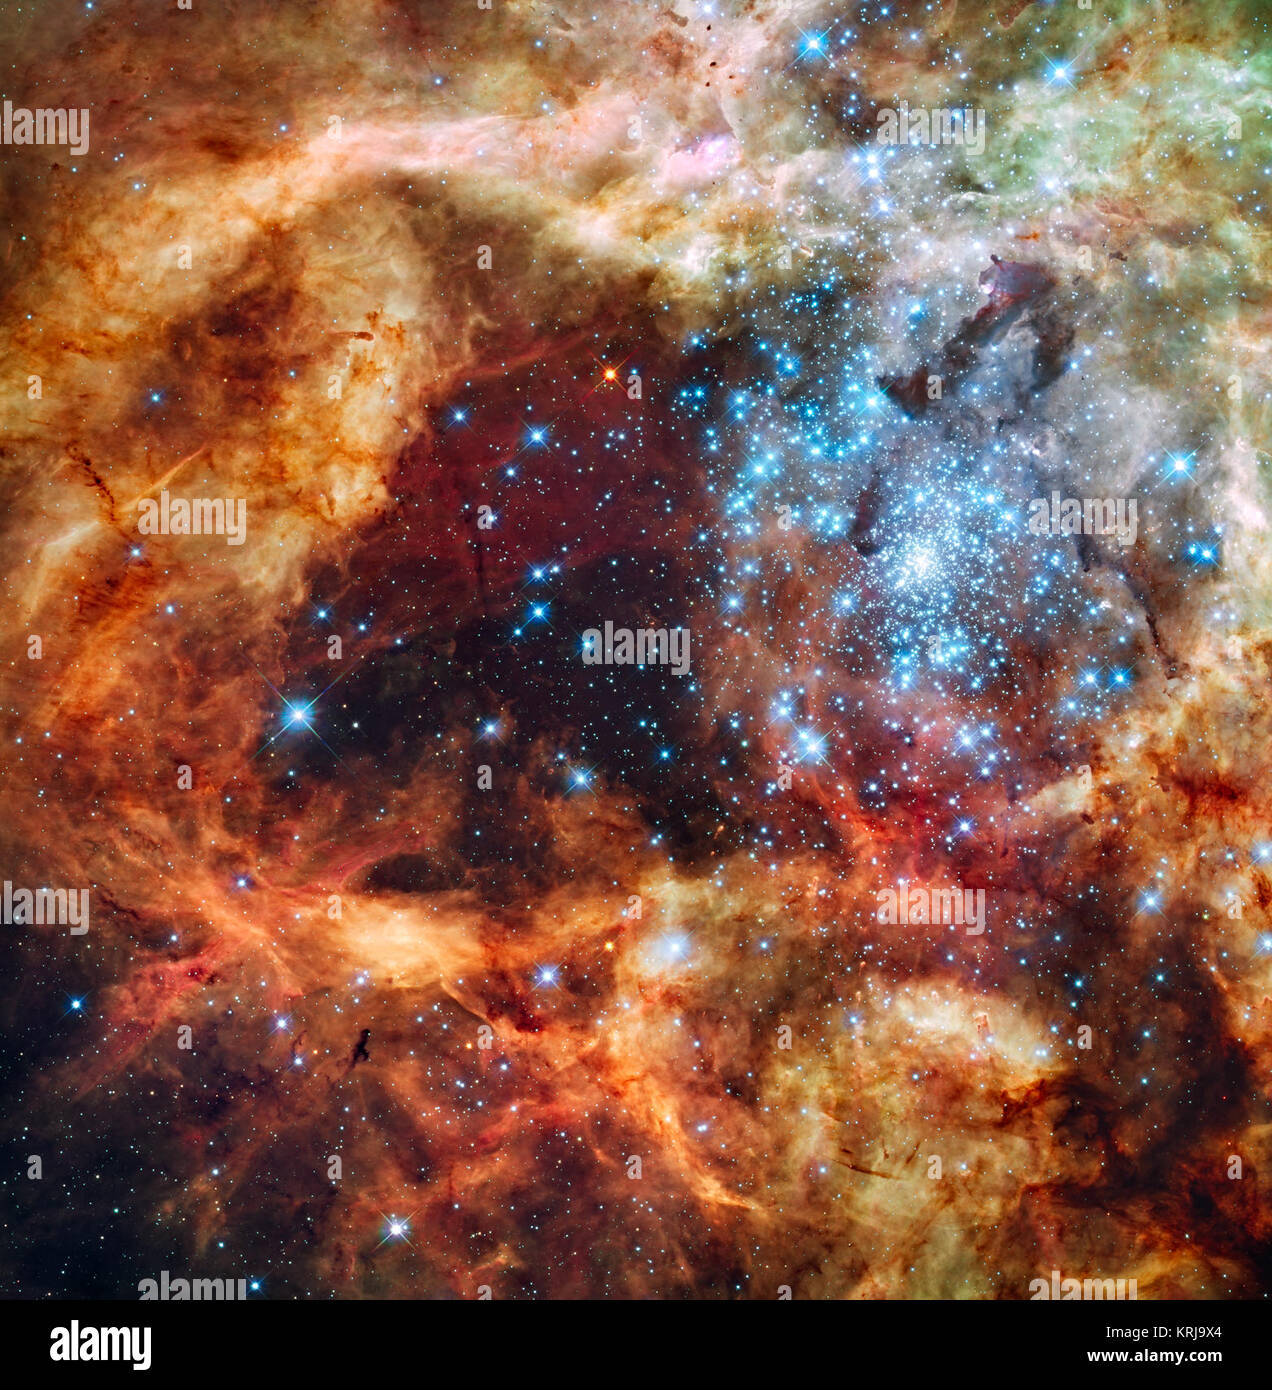 Grand star-forming Region R 136 in NGC 2070 (durch das Hubble Space Telescope erfasst) Stockfoto